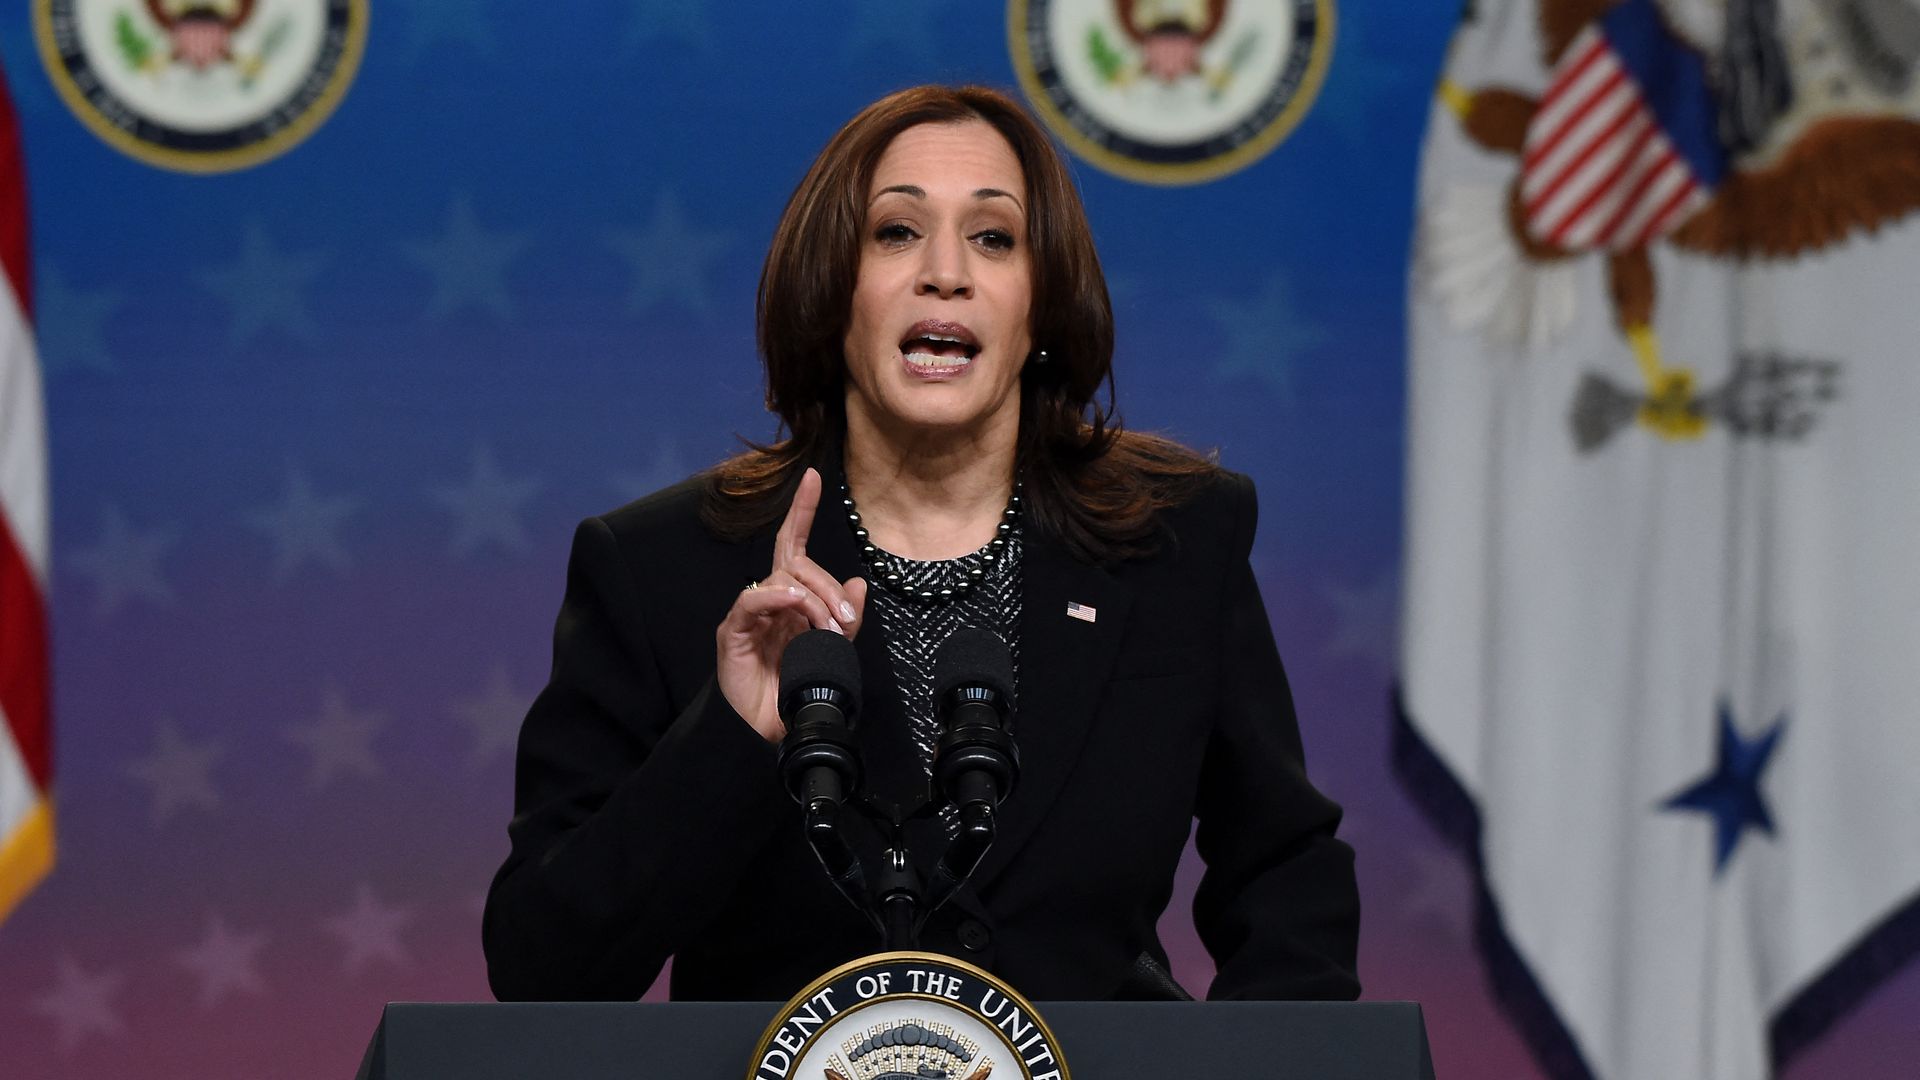 Photo of Kamala Harris speaking and gesturing with her hand from behind a podium